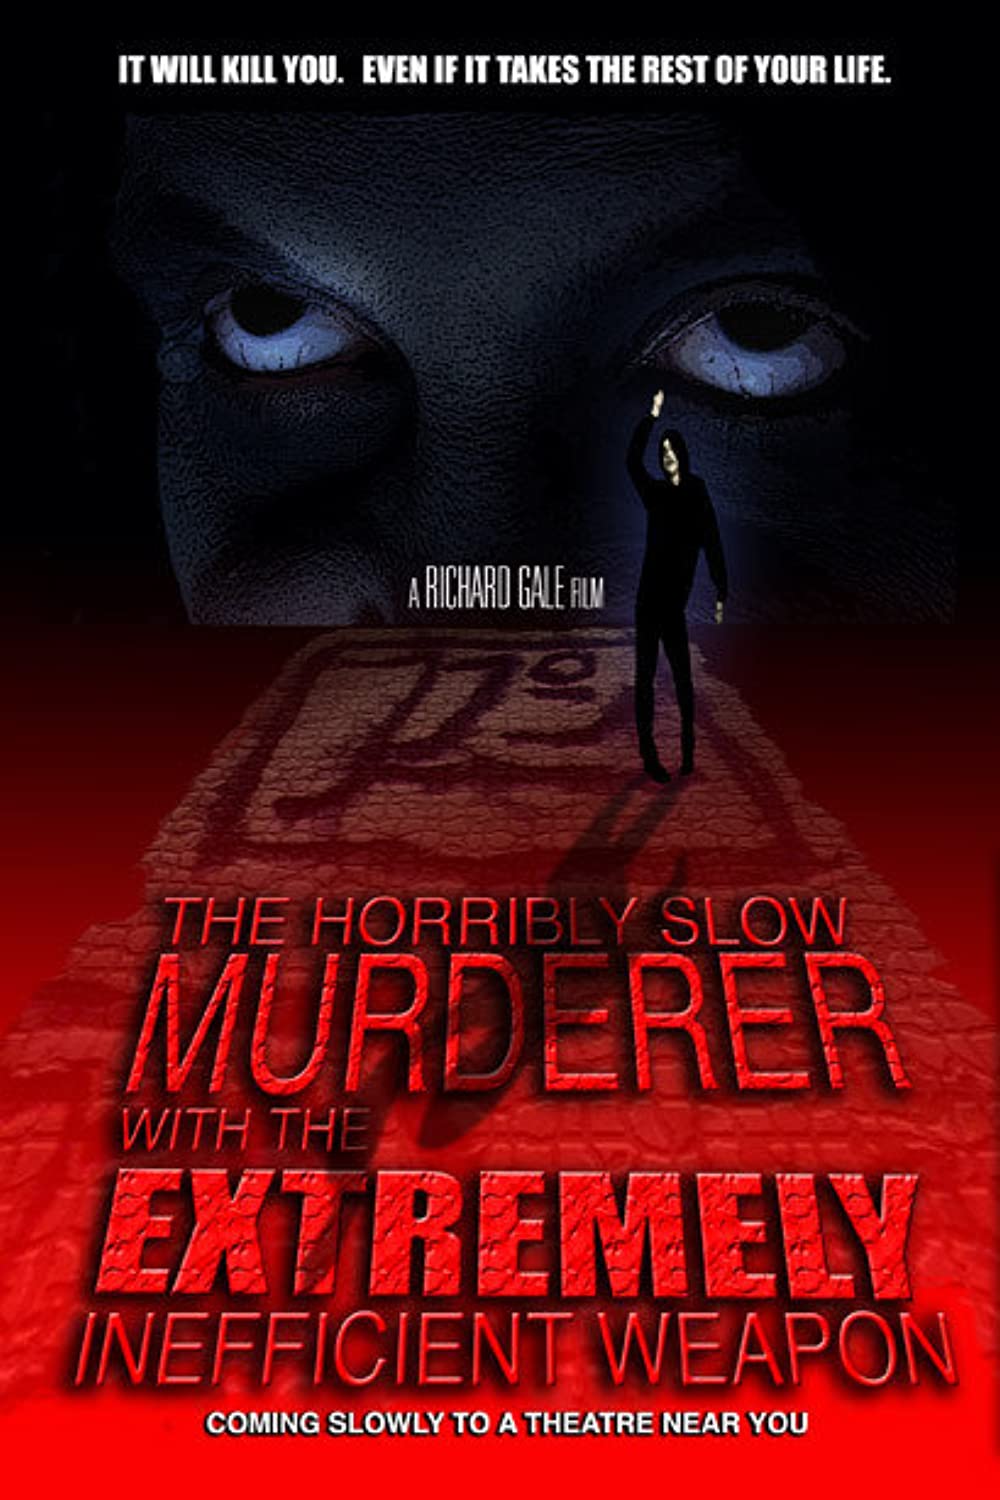 The Horribly Slow Murderer with the Extremely Inefficient Weapon (Short 2008)